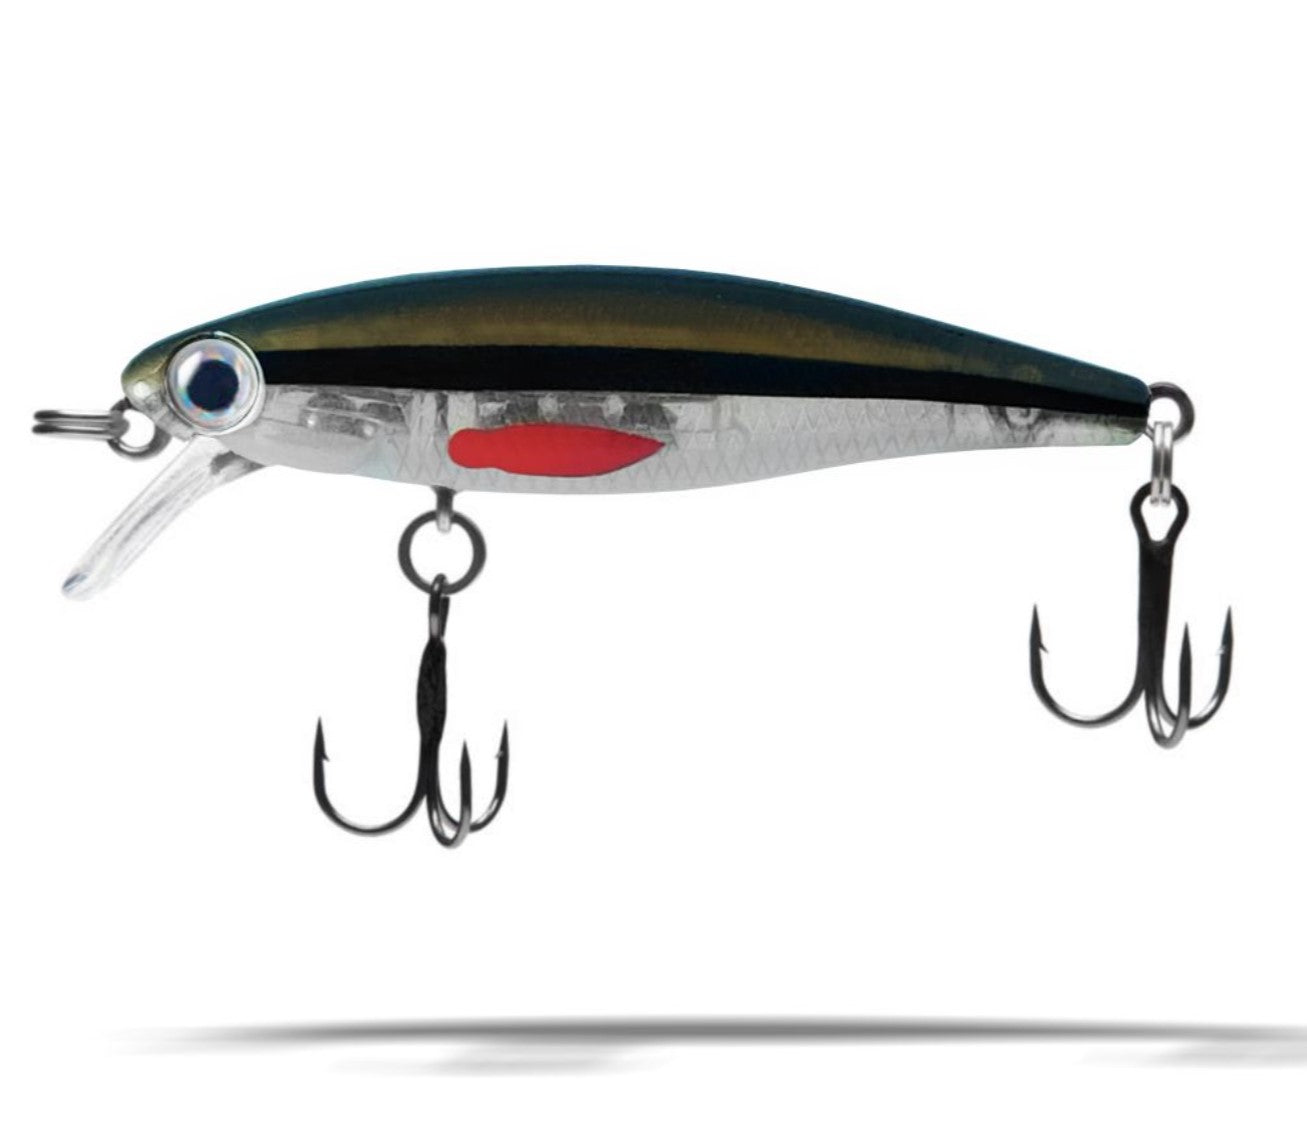 Dynamic Lures HD Trout (Redfin Shiner) – Trophy Trout Lures and Fly Fishing